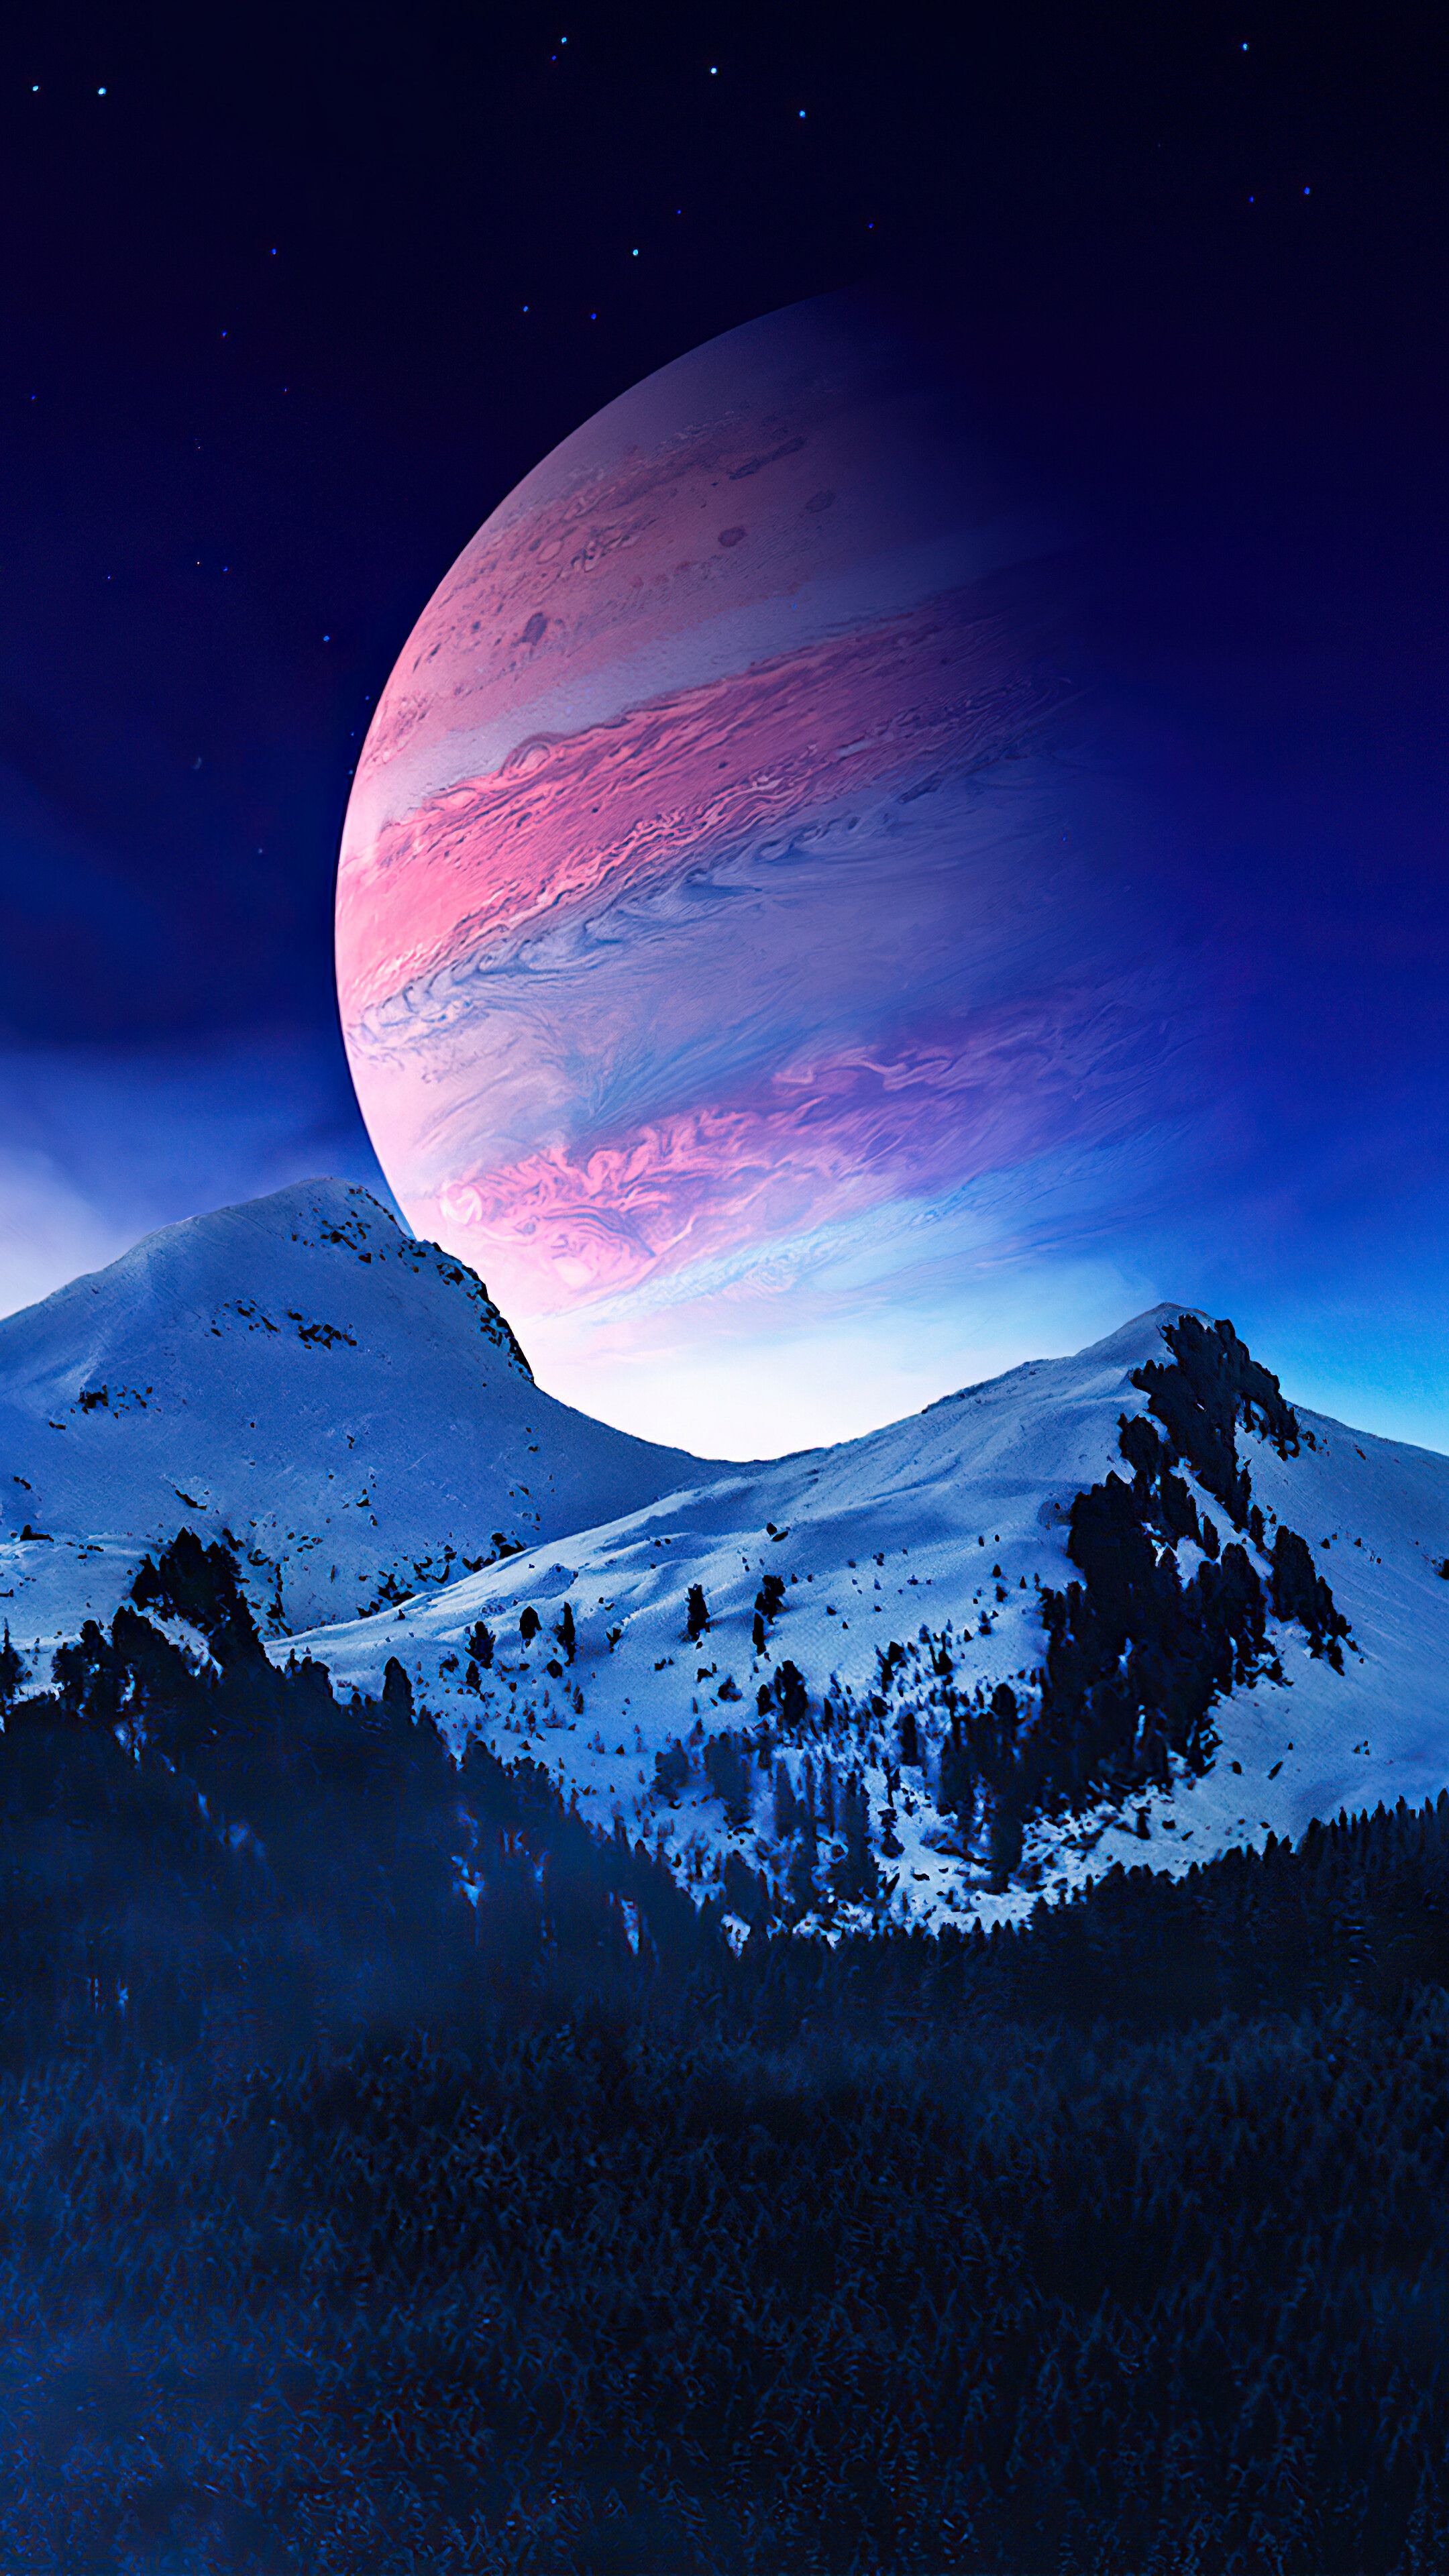 Night, Scenery, Mountain, Landscape, Planet, Digital Art, 4K phone HD Wallpaper, Image, Background, Photo and Picture. Mocah HD Wallpaper